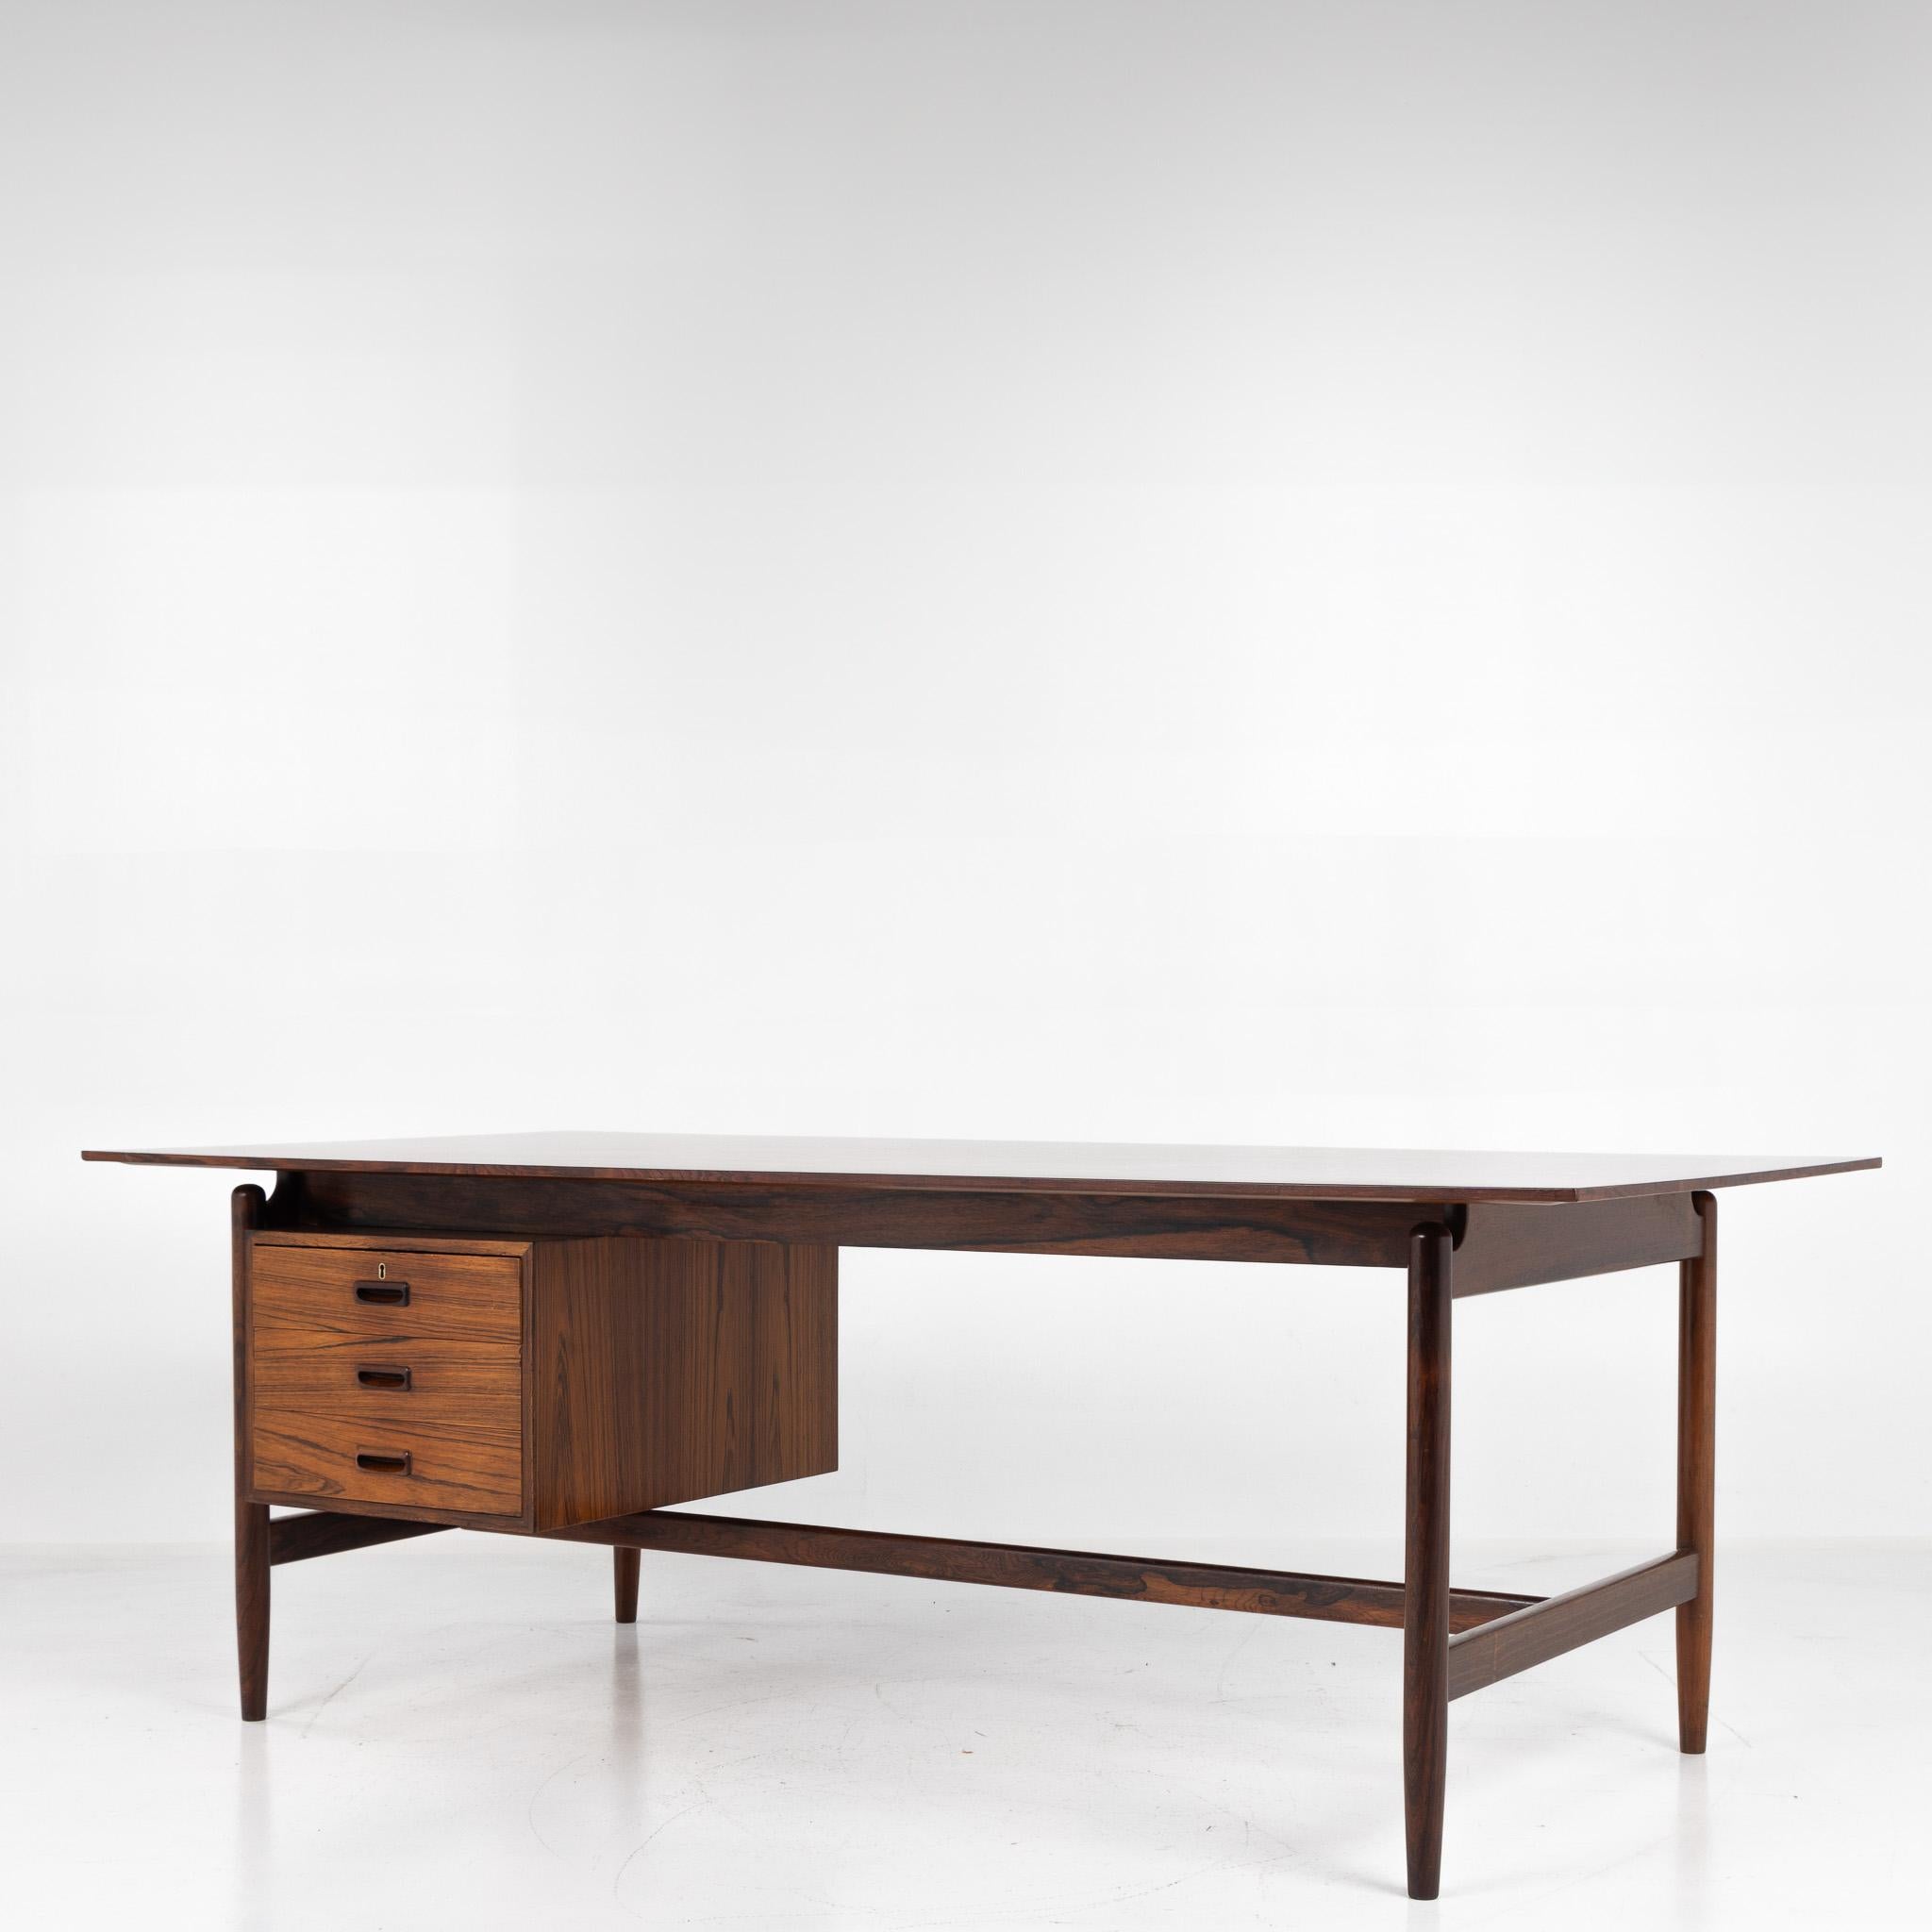 NV 50 - Desk in rosewood on round, tapered legs. Front with drawer module with three drawers. Designed in 1945. Architect Finn Juhl for master cabinetmaker Niels Vodder.